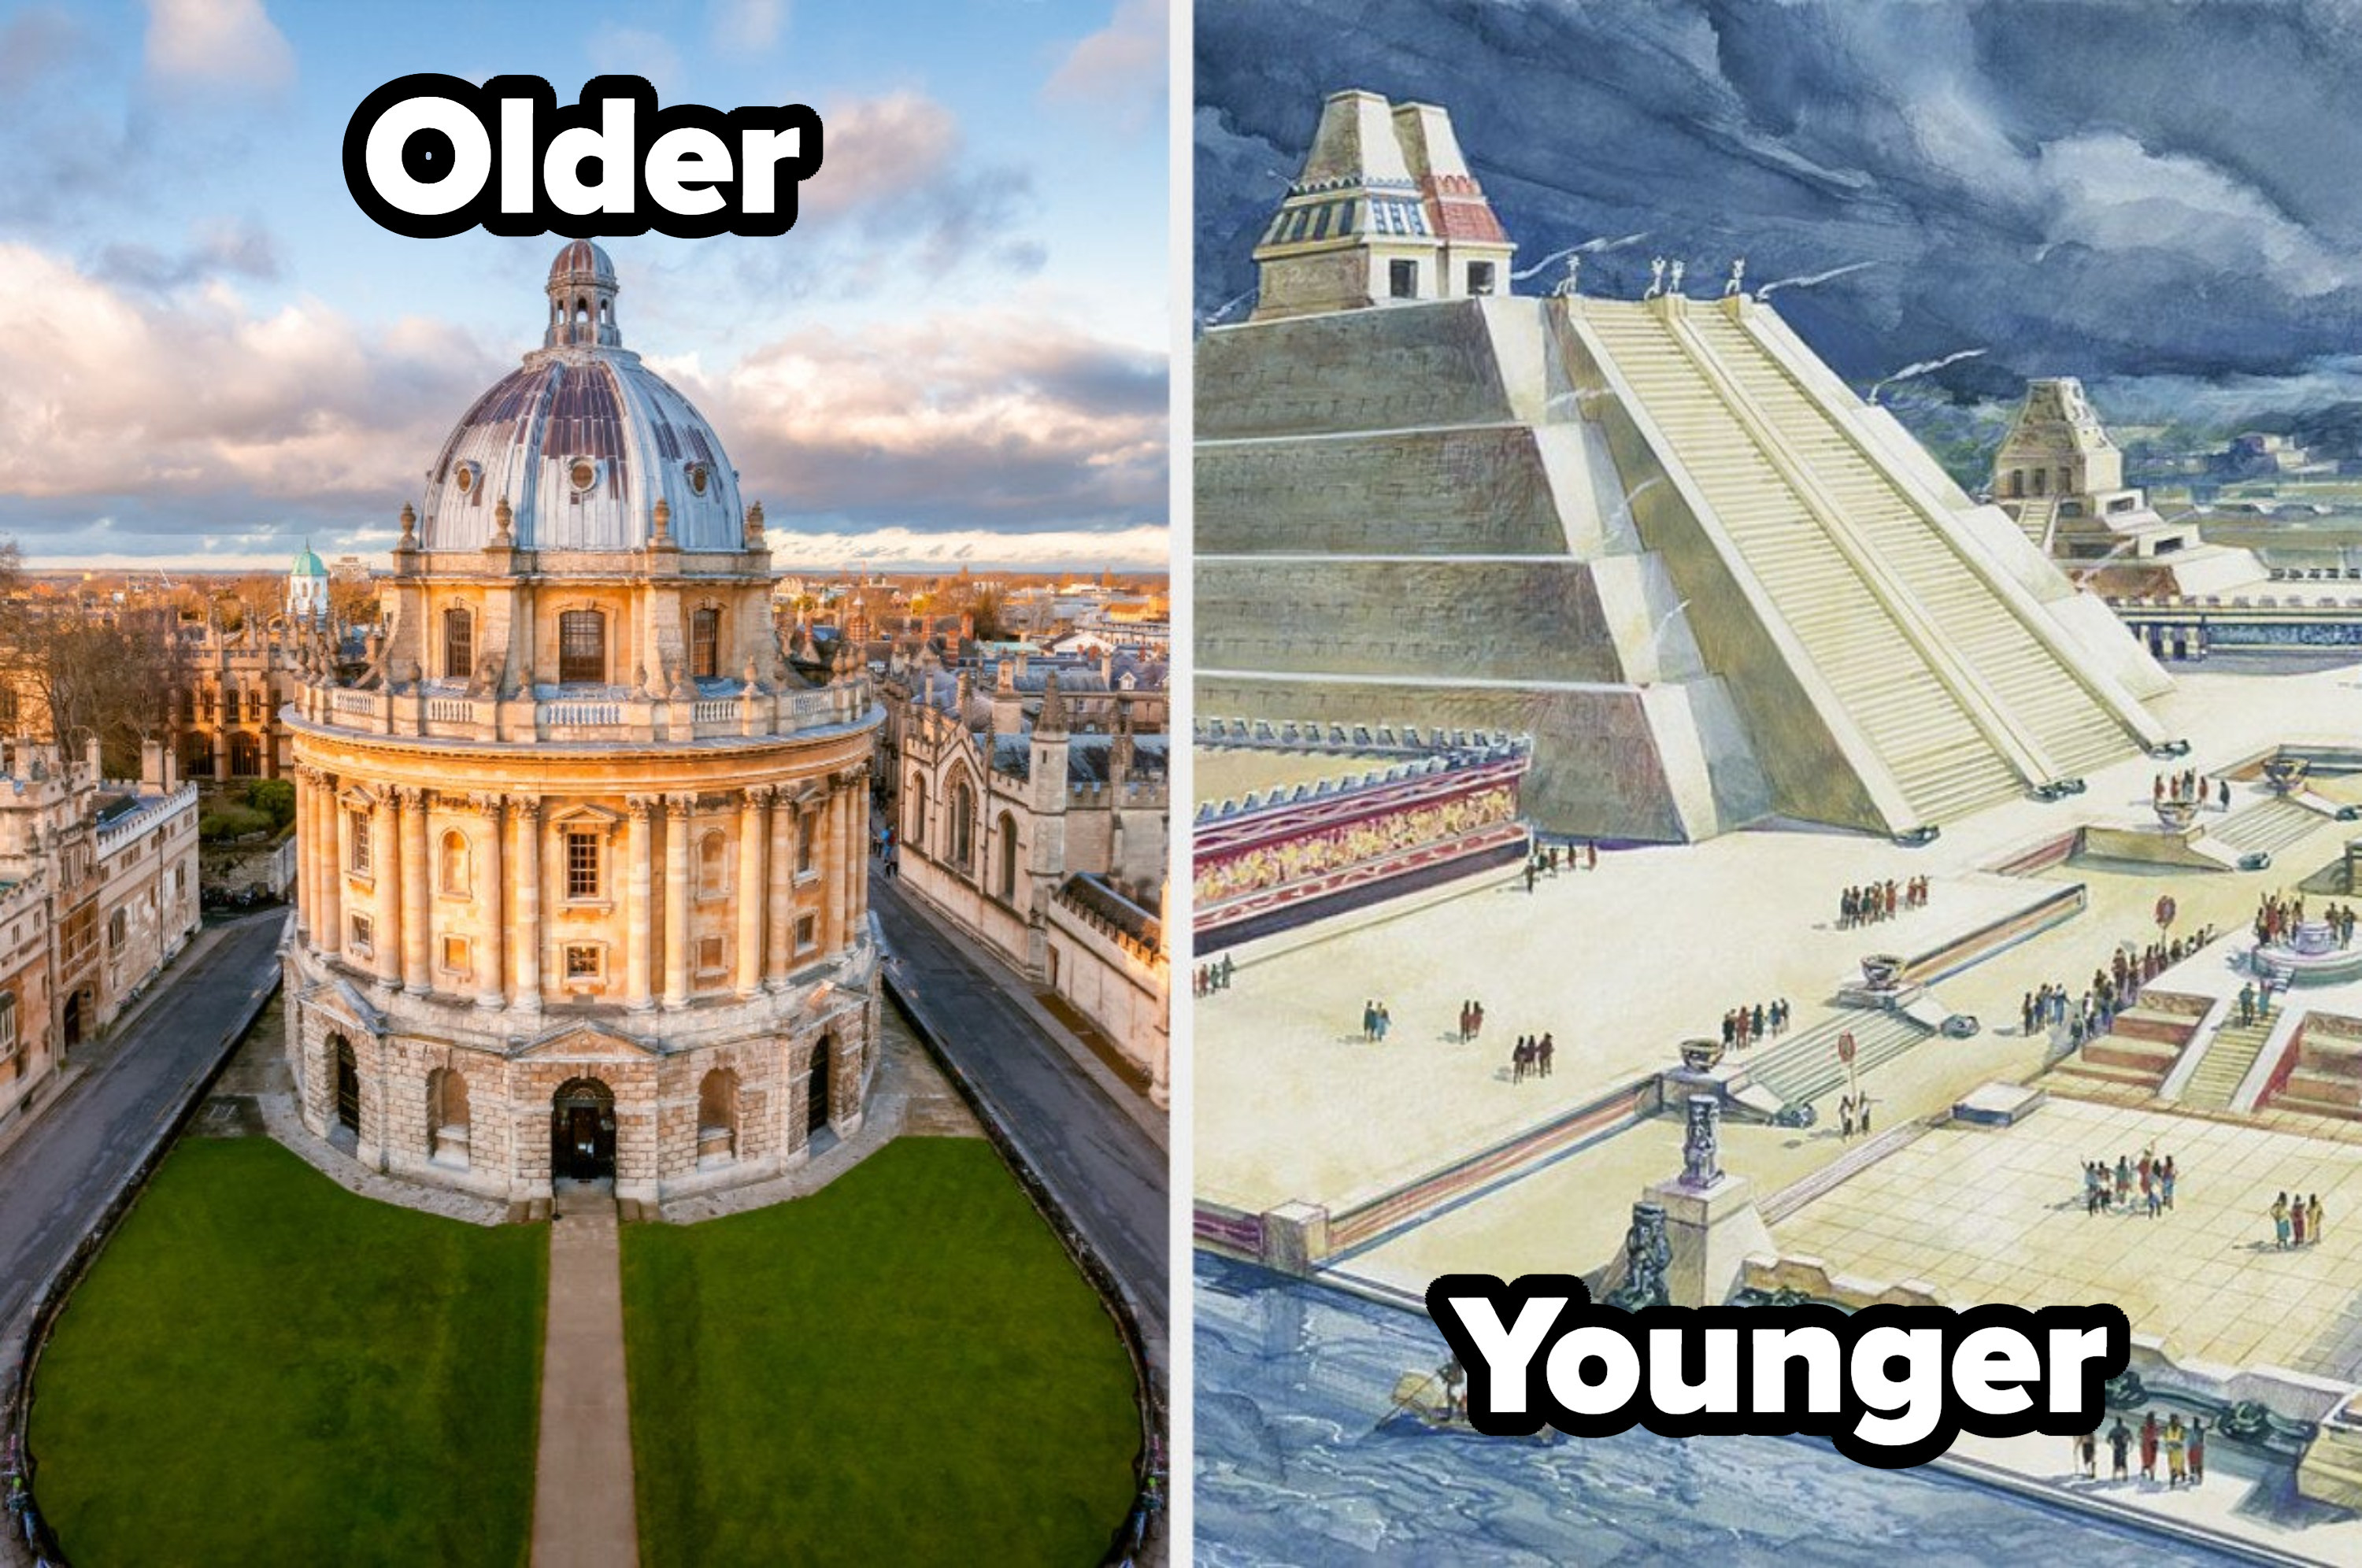 Oxford and a rendering of an Aztec civilization